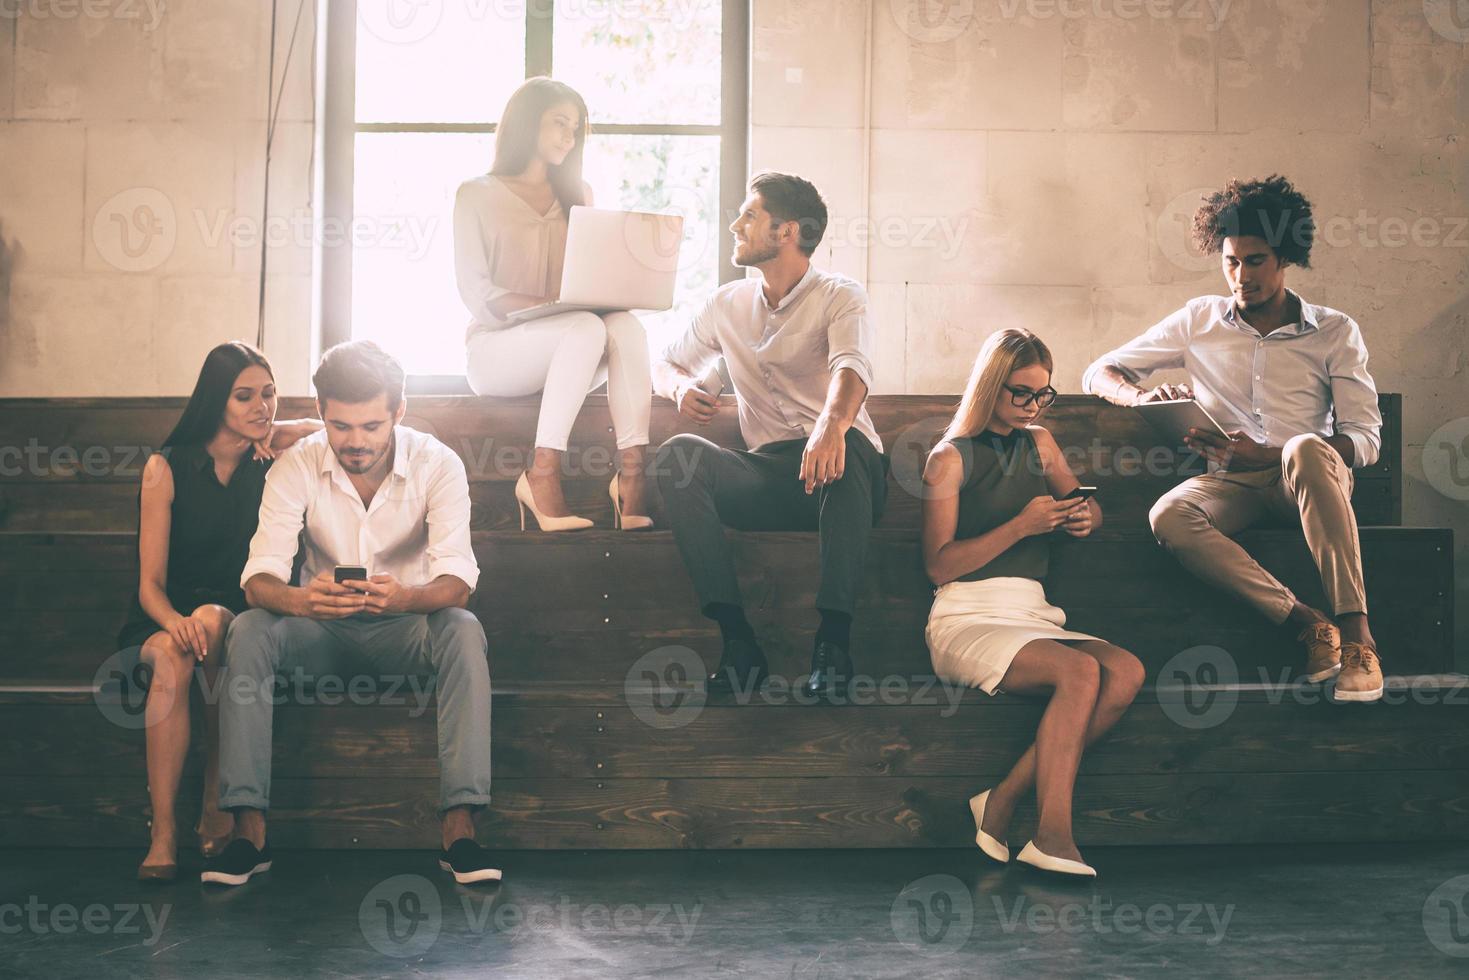 Students life. Group of cheerful young people communicting while holding different gadgets and sitting close to each other on steps photo